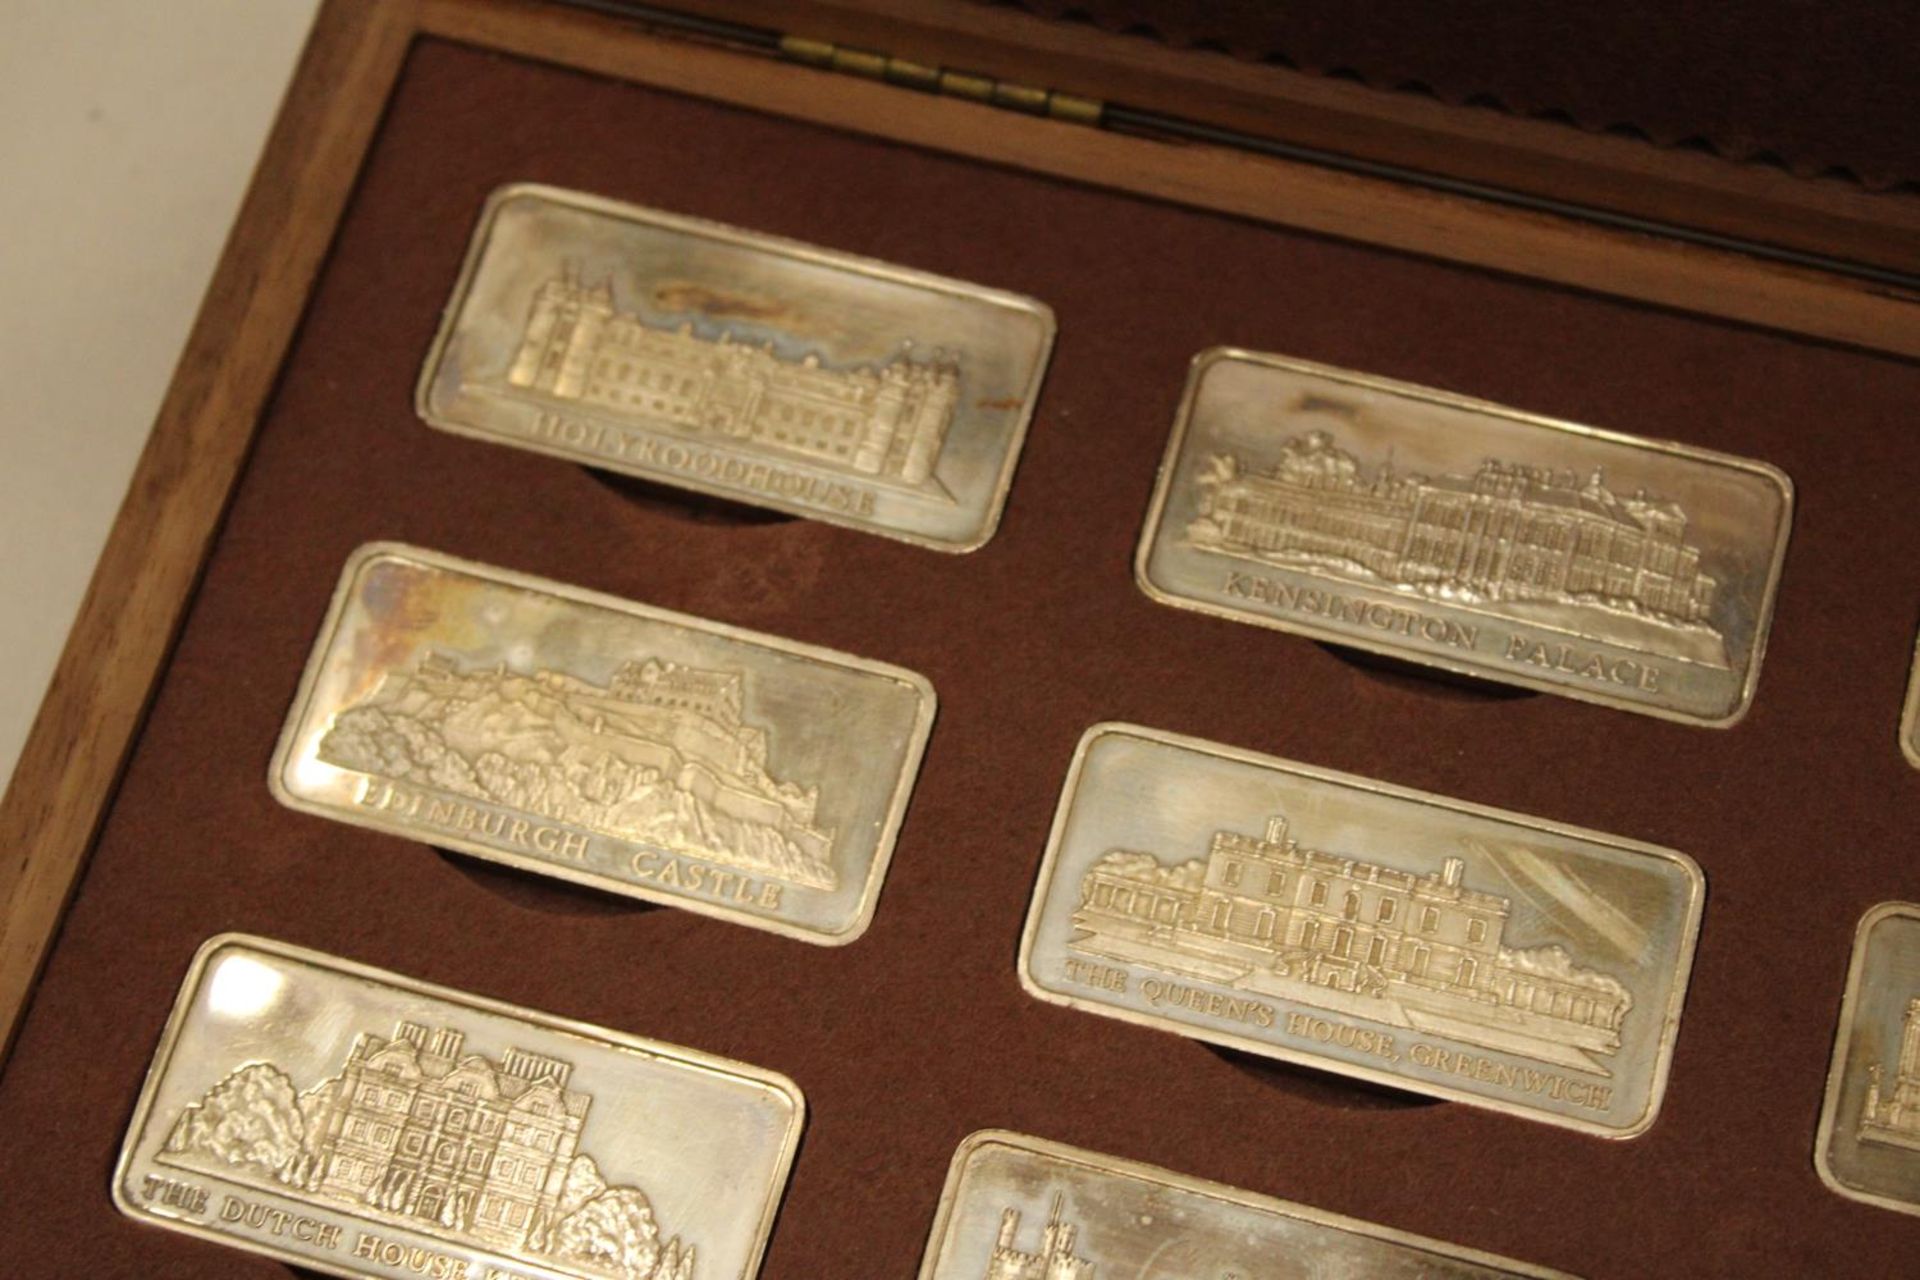 A CASED COLLECTION OF 12 SOLID SILVER INGOTS OF ROYAL PALACES BY THE BIRMINGHAM MINT A LIMITED - Image 3 of 4